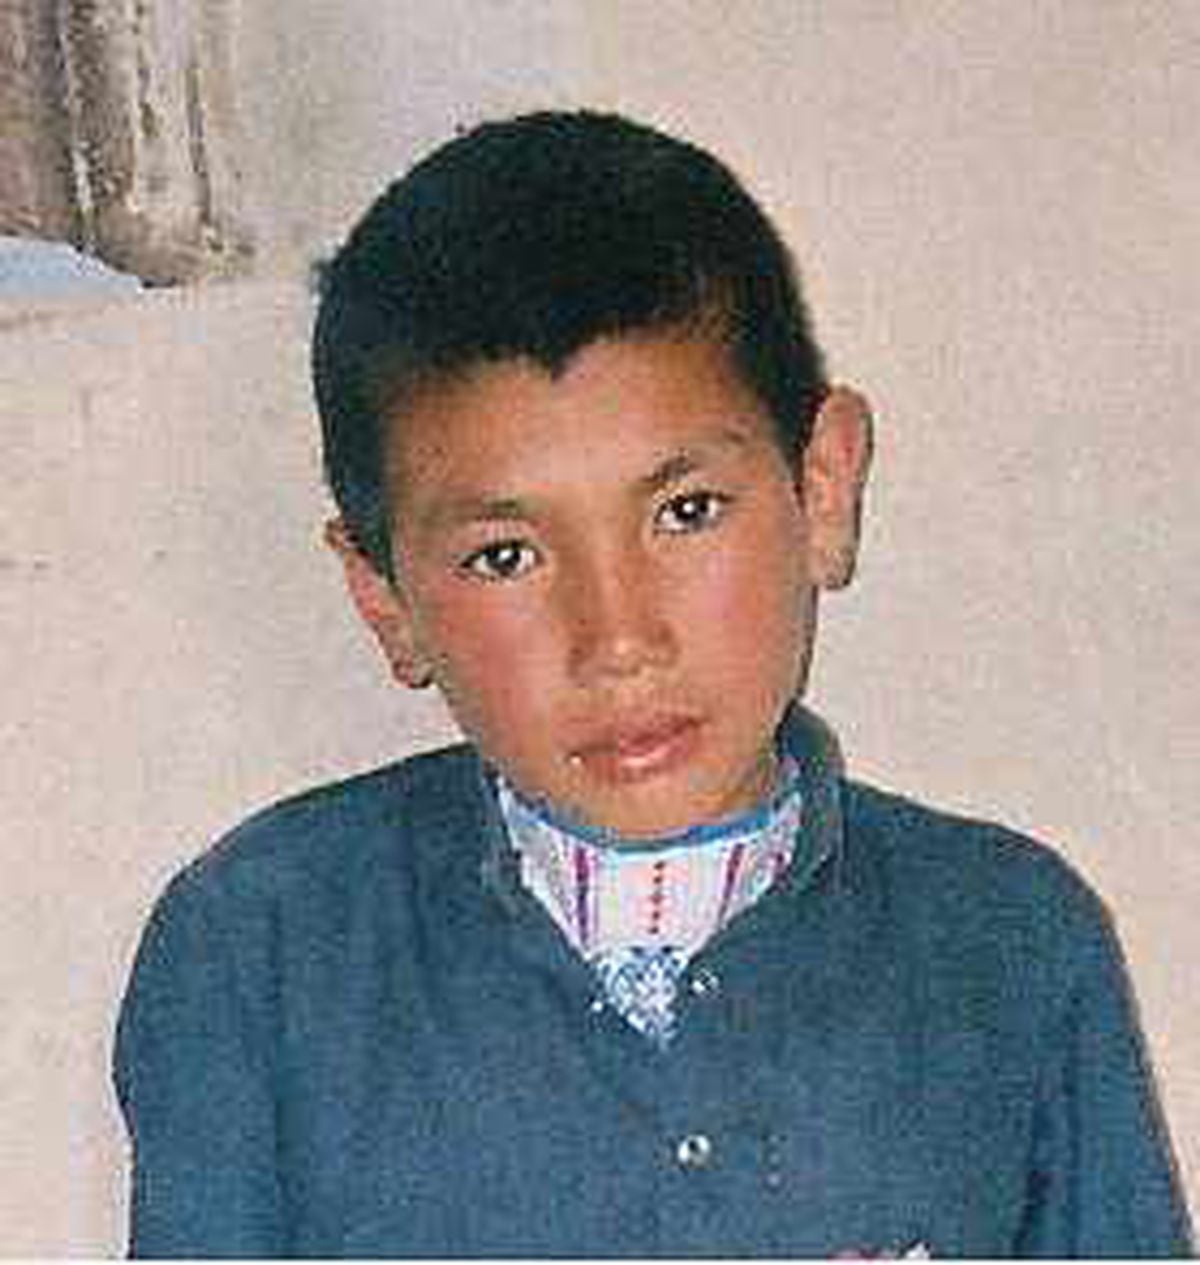 Rohullah at the time he was kidnapped